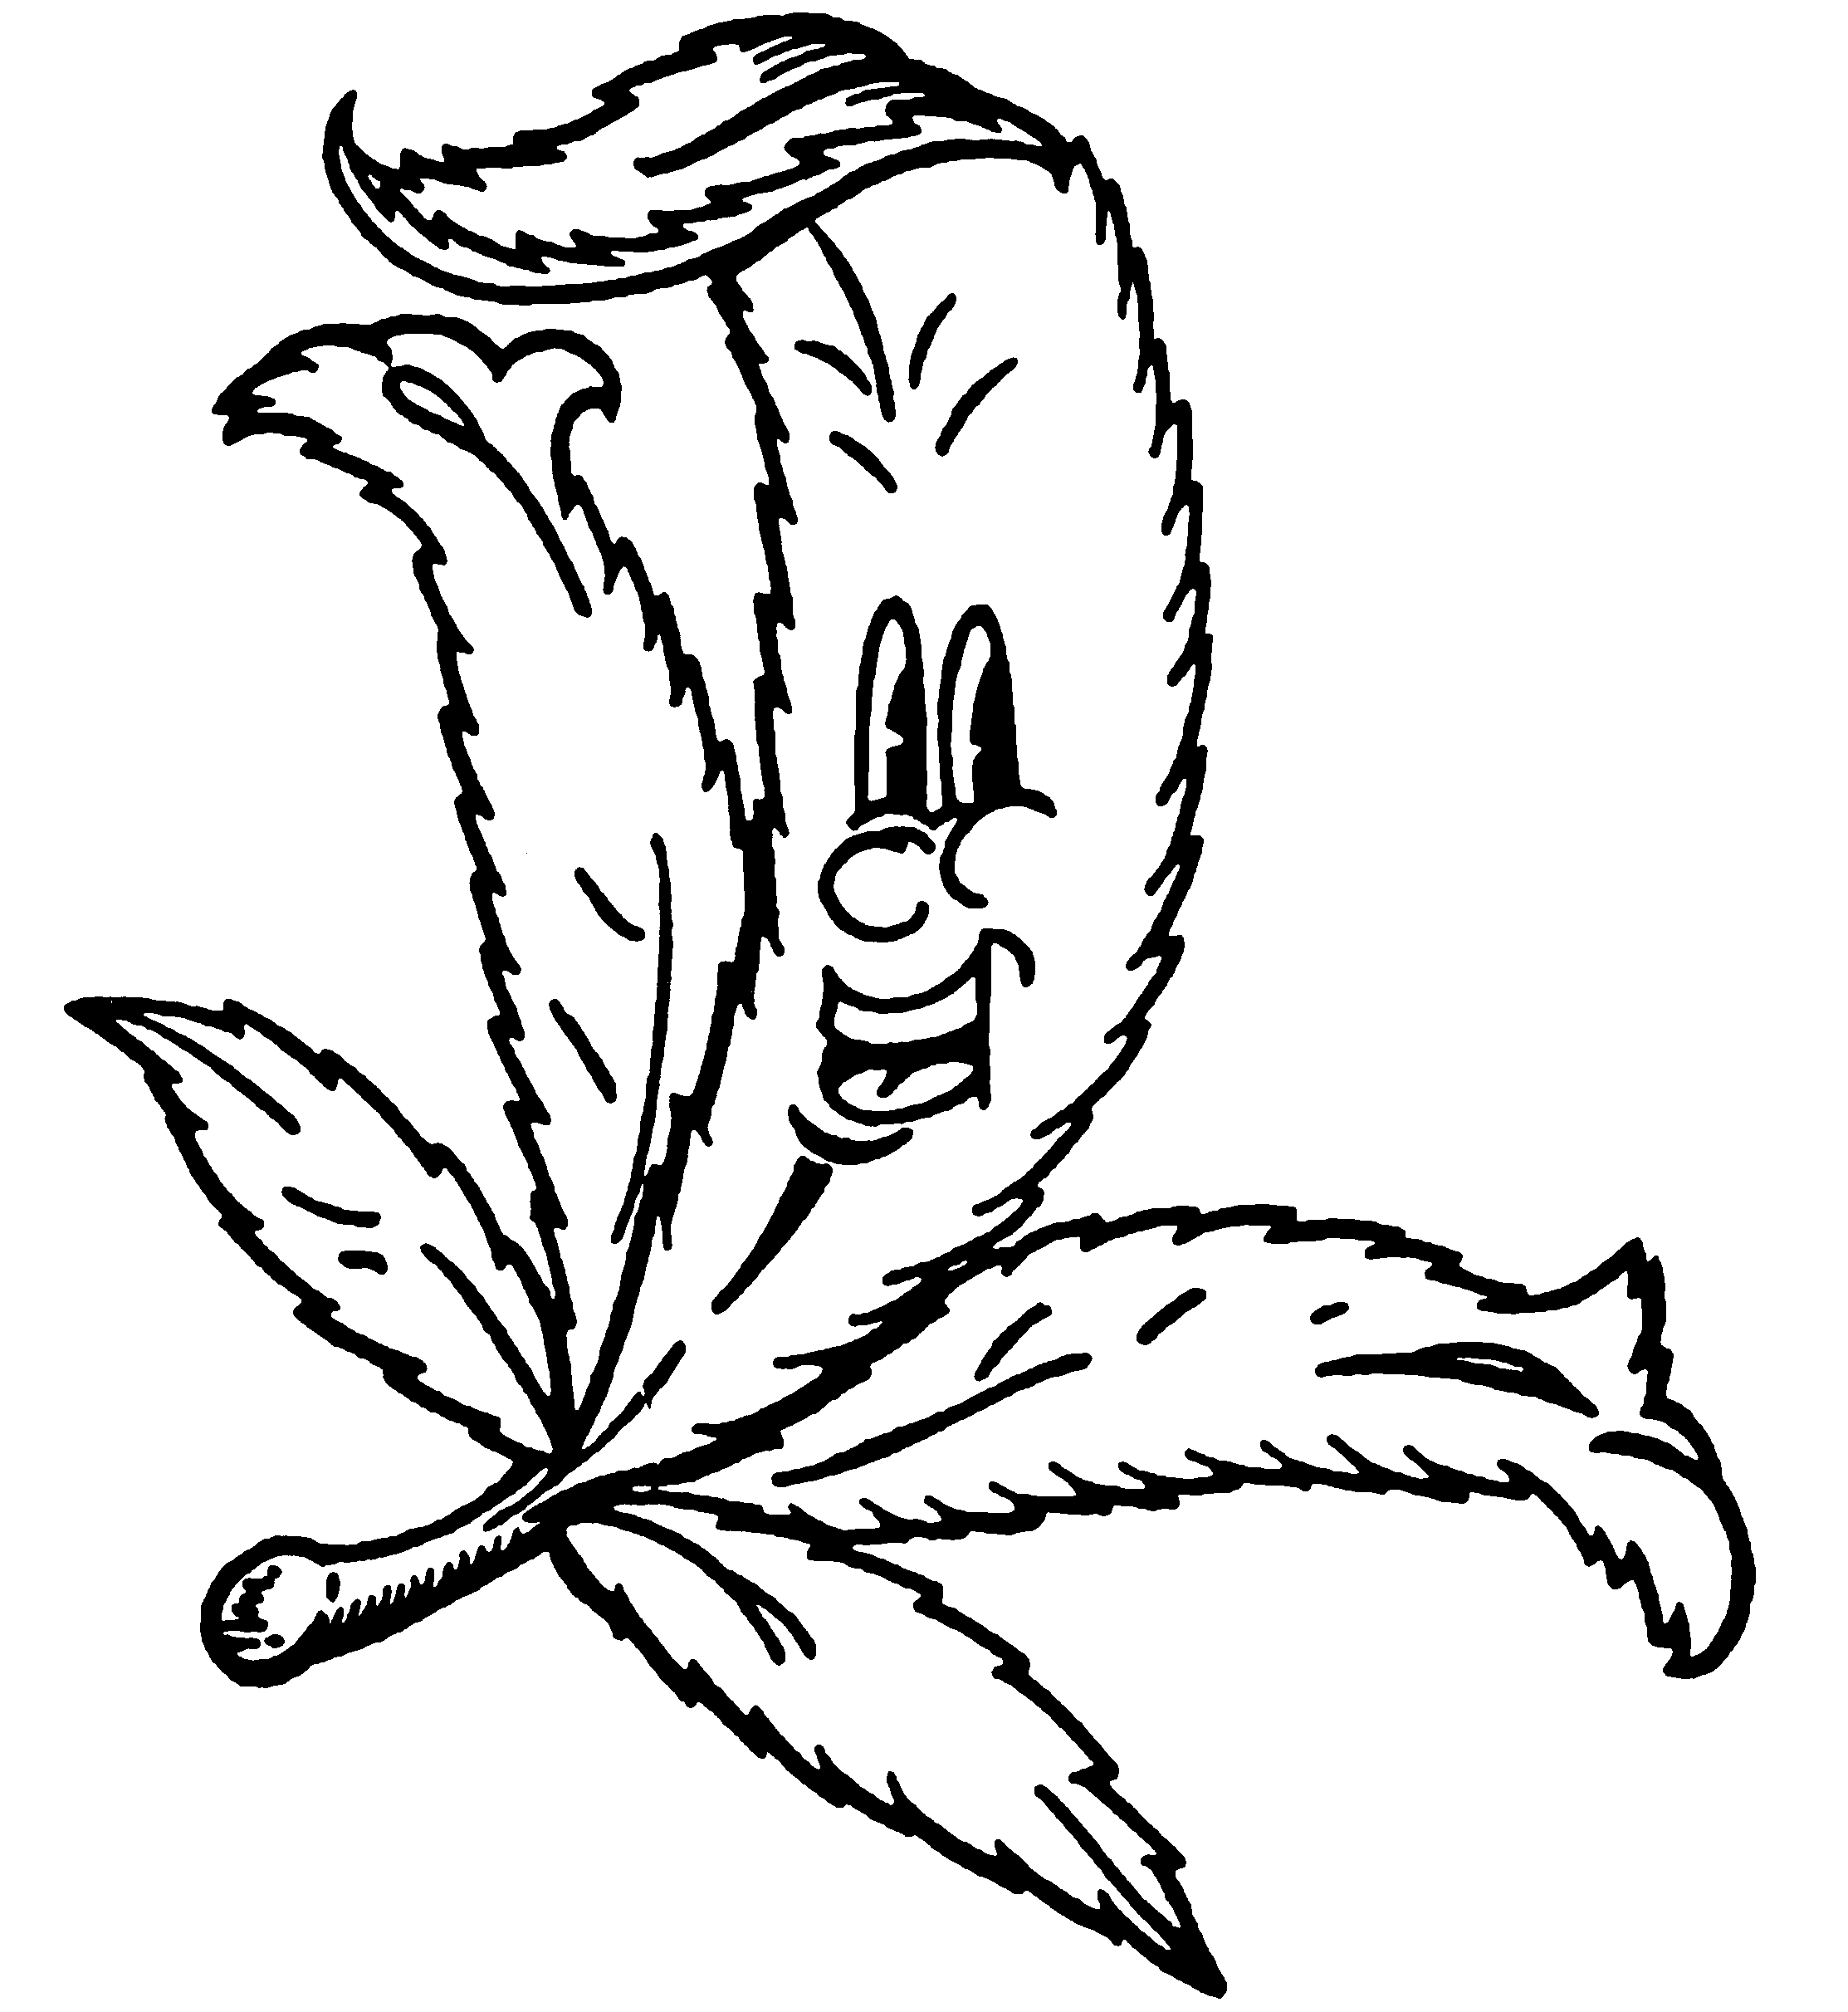 Weed Leaf Drawing - ClipArt Best